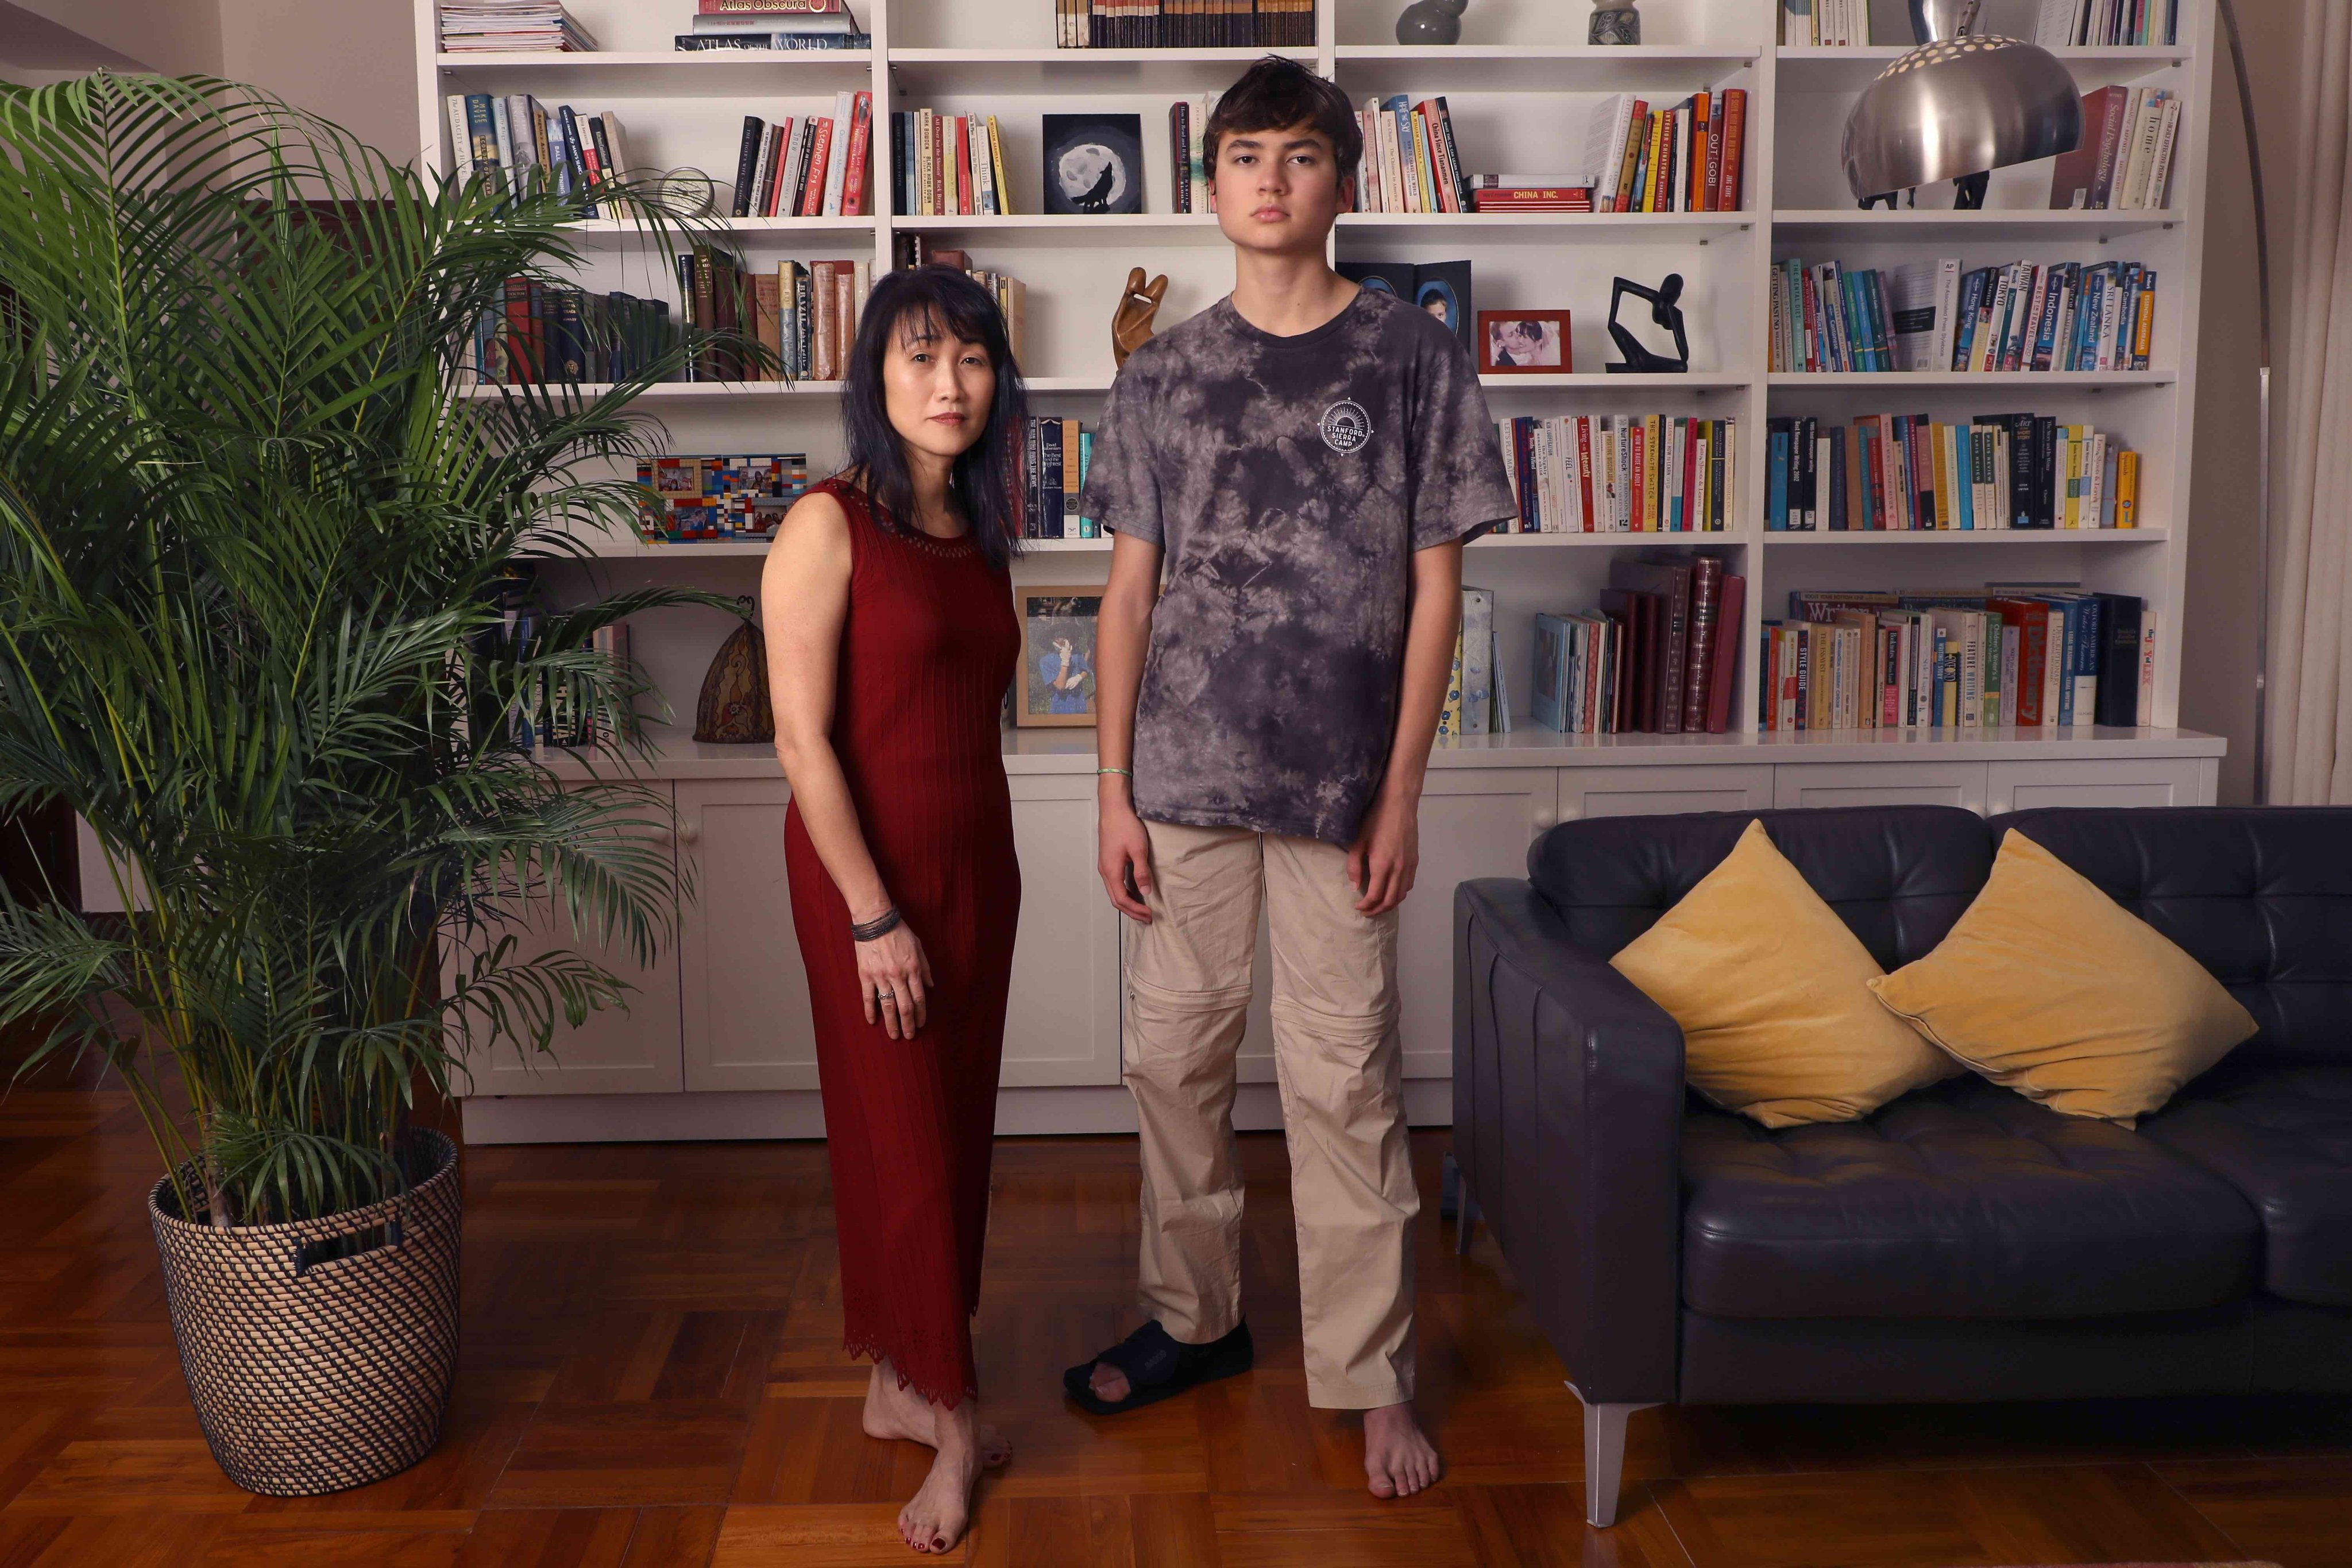 An image of a woman and her mixed-race son from Kim Jee-yun’s exhibition. Photo: Soluna Fine Art